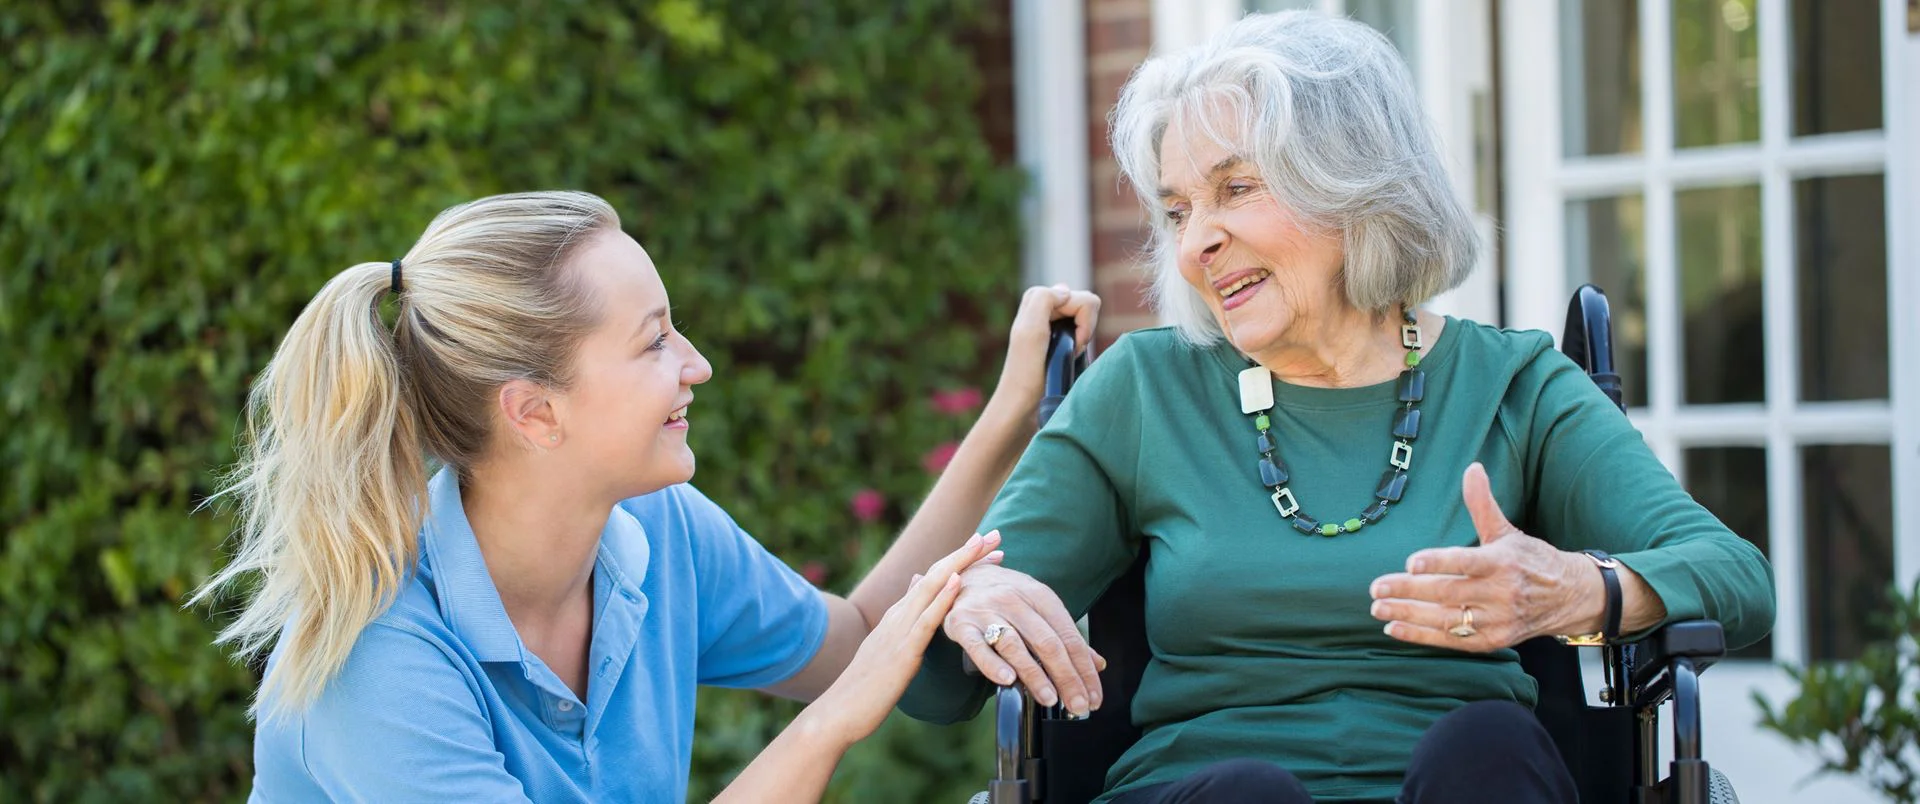 Life as a domiciliary care worker